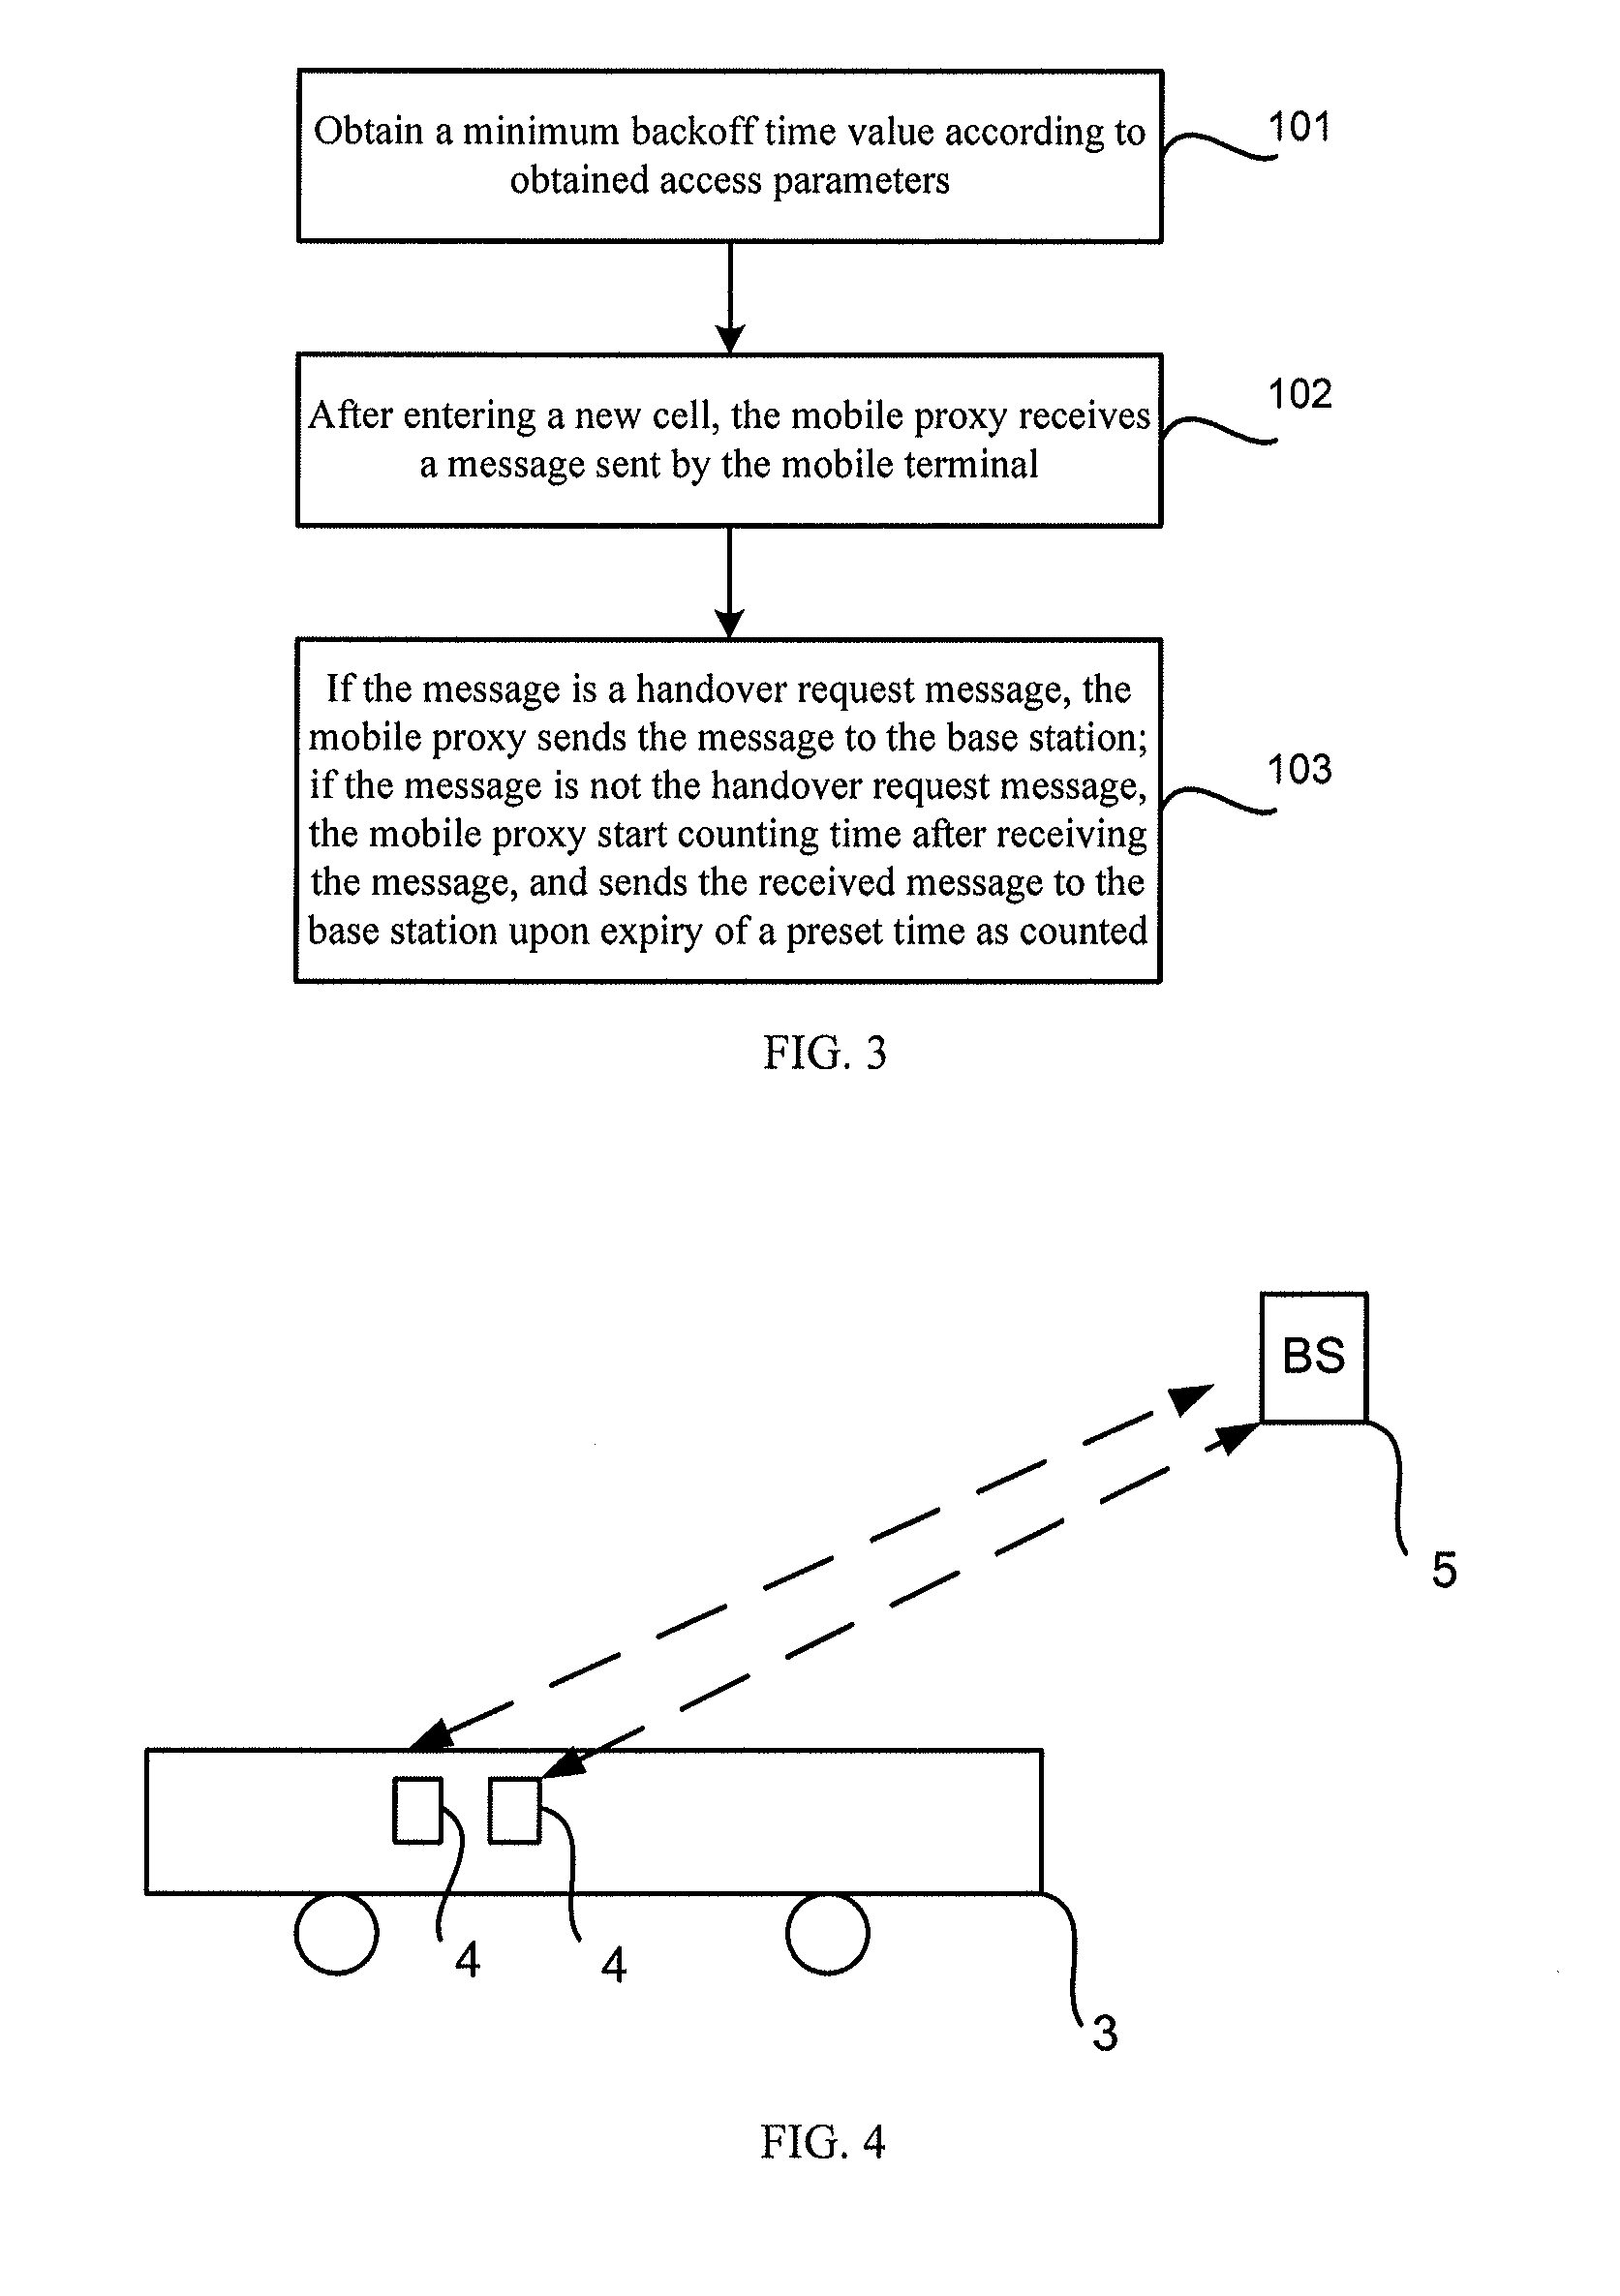 Method for improving handover success rate of group mobile terminals, mobile proxy, and mobile terminal